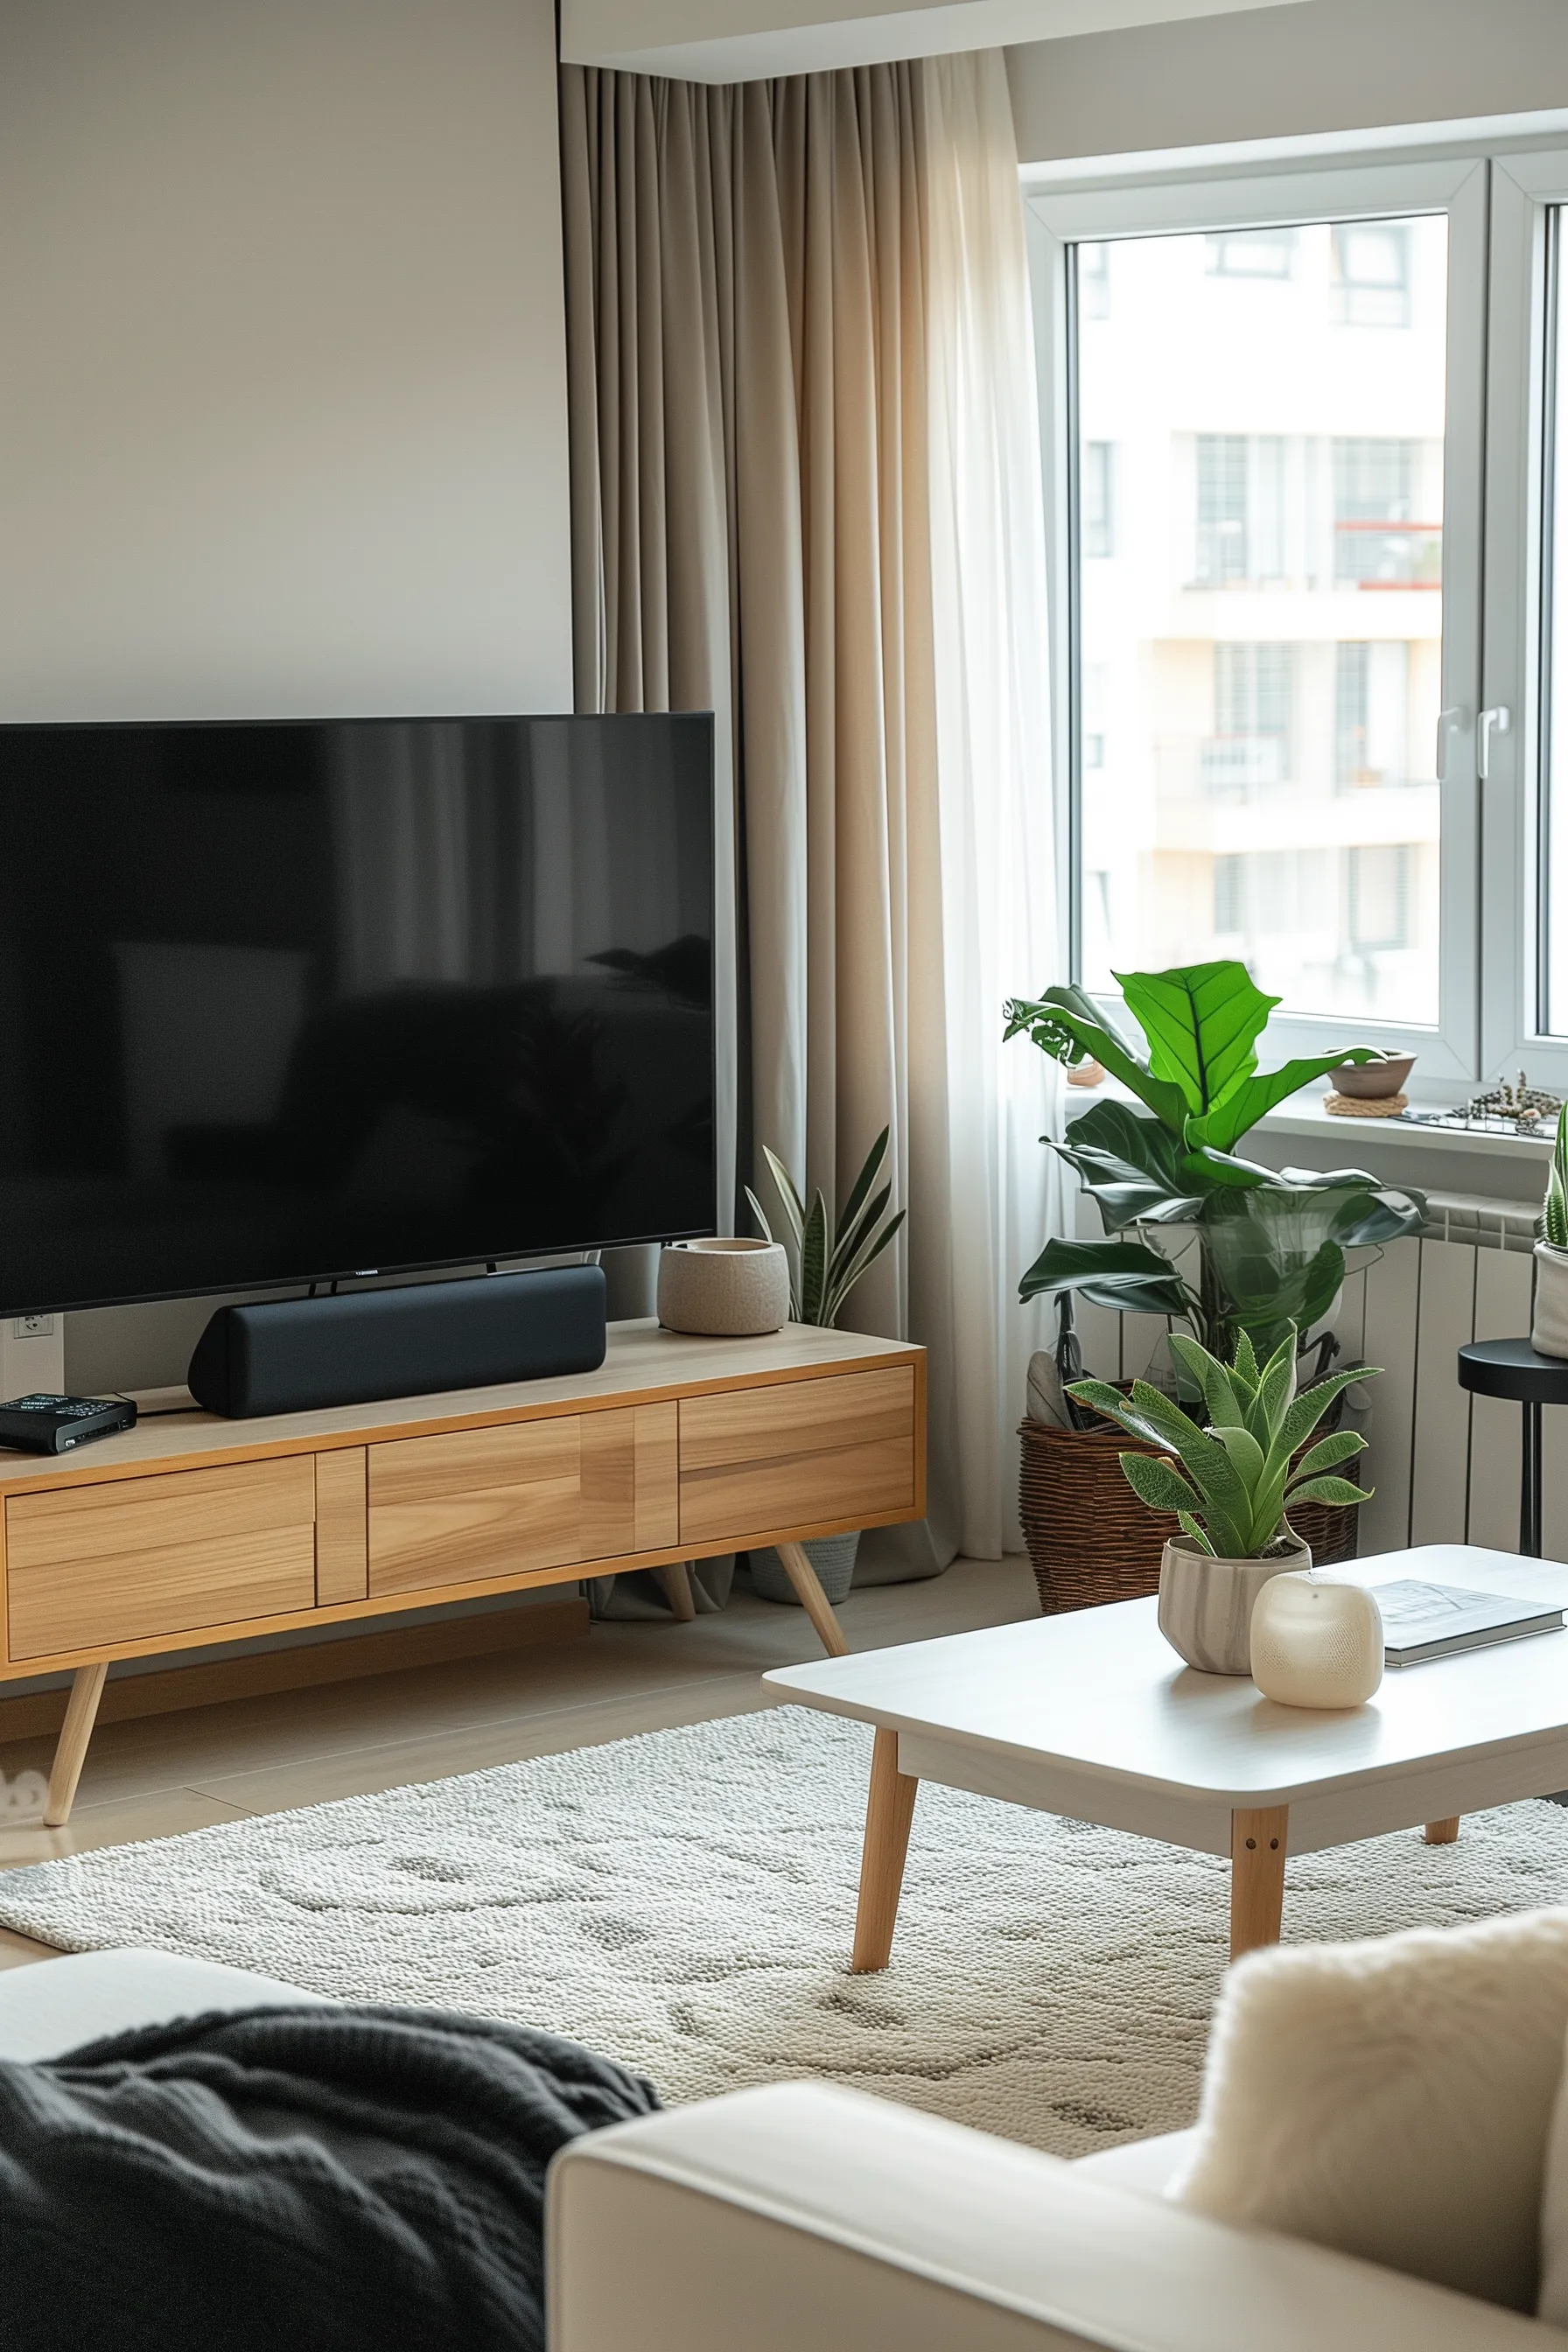 A mounted tv in a living room